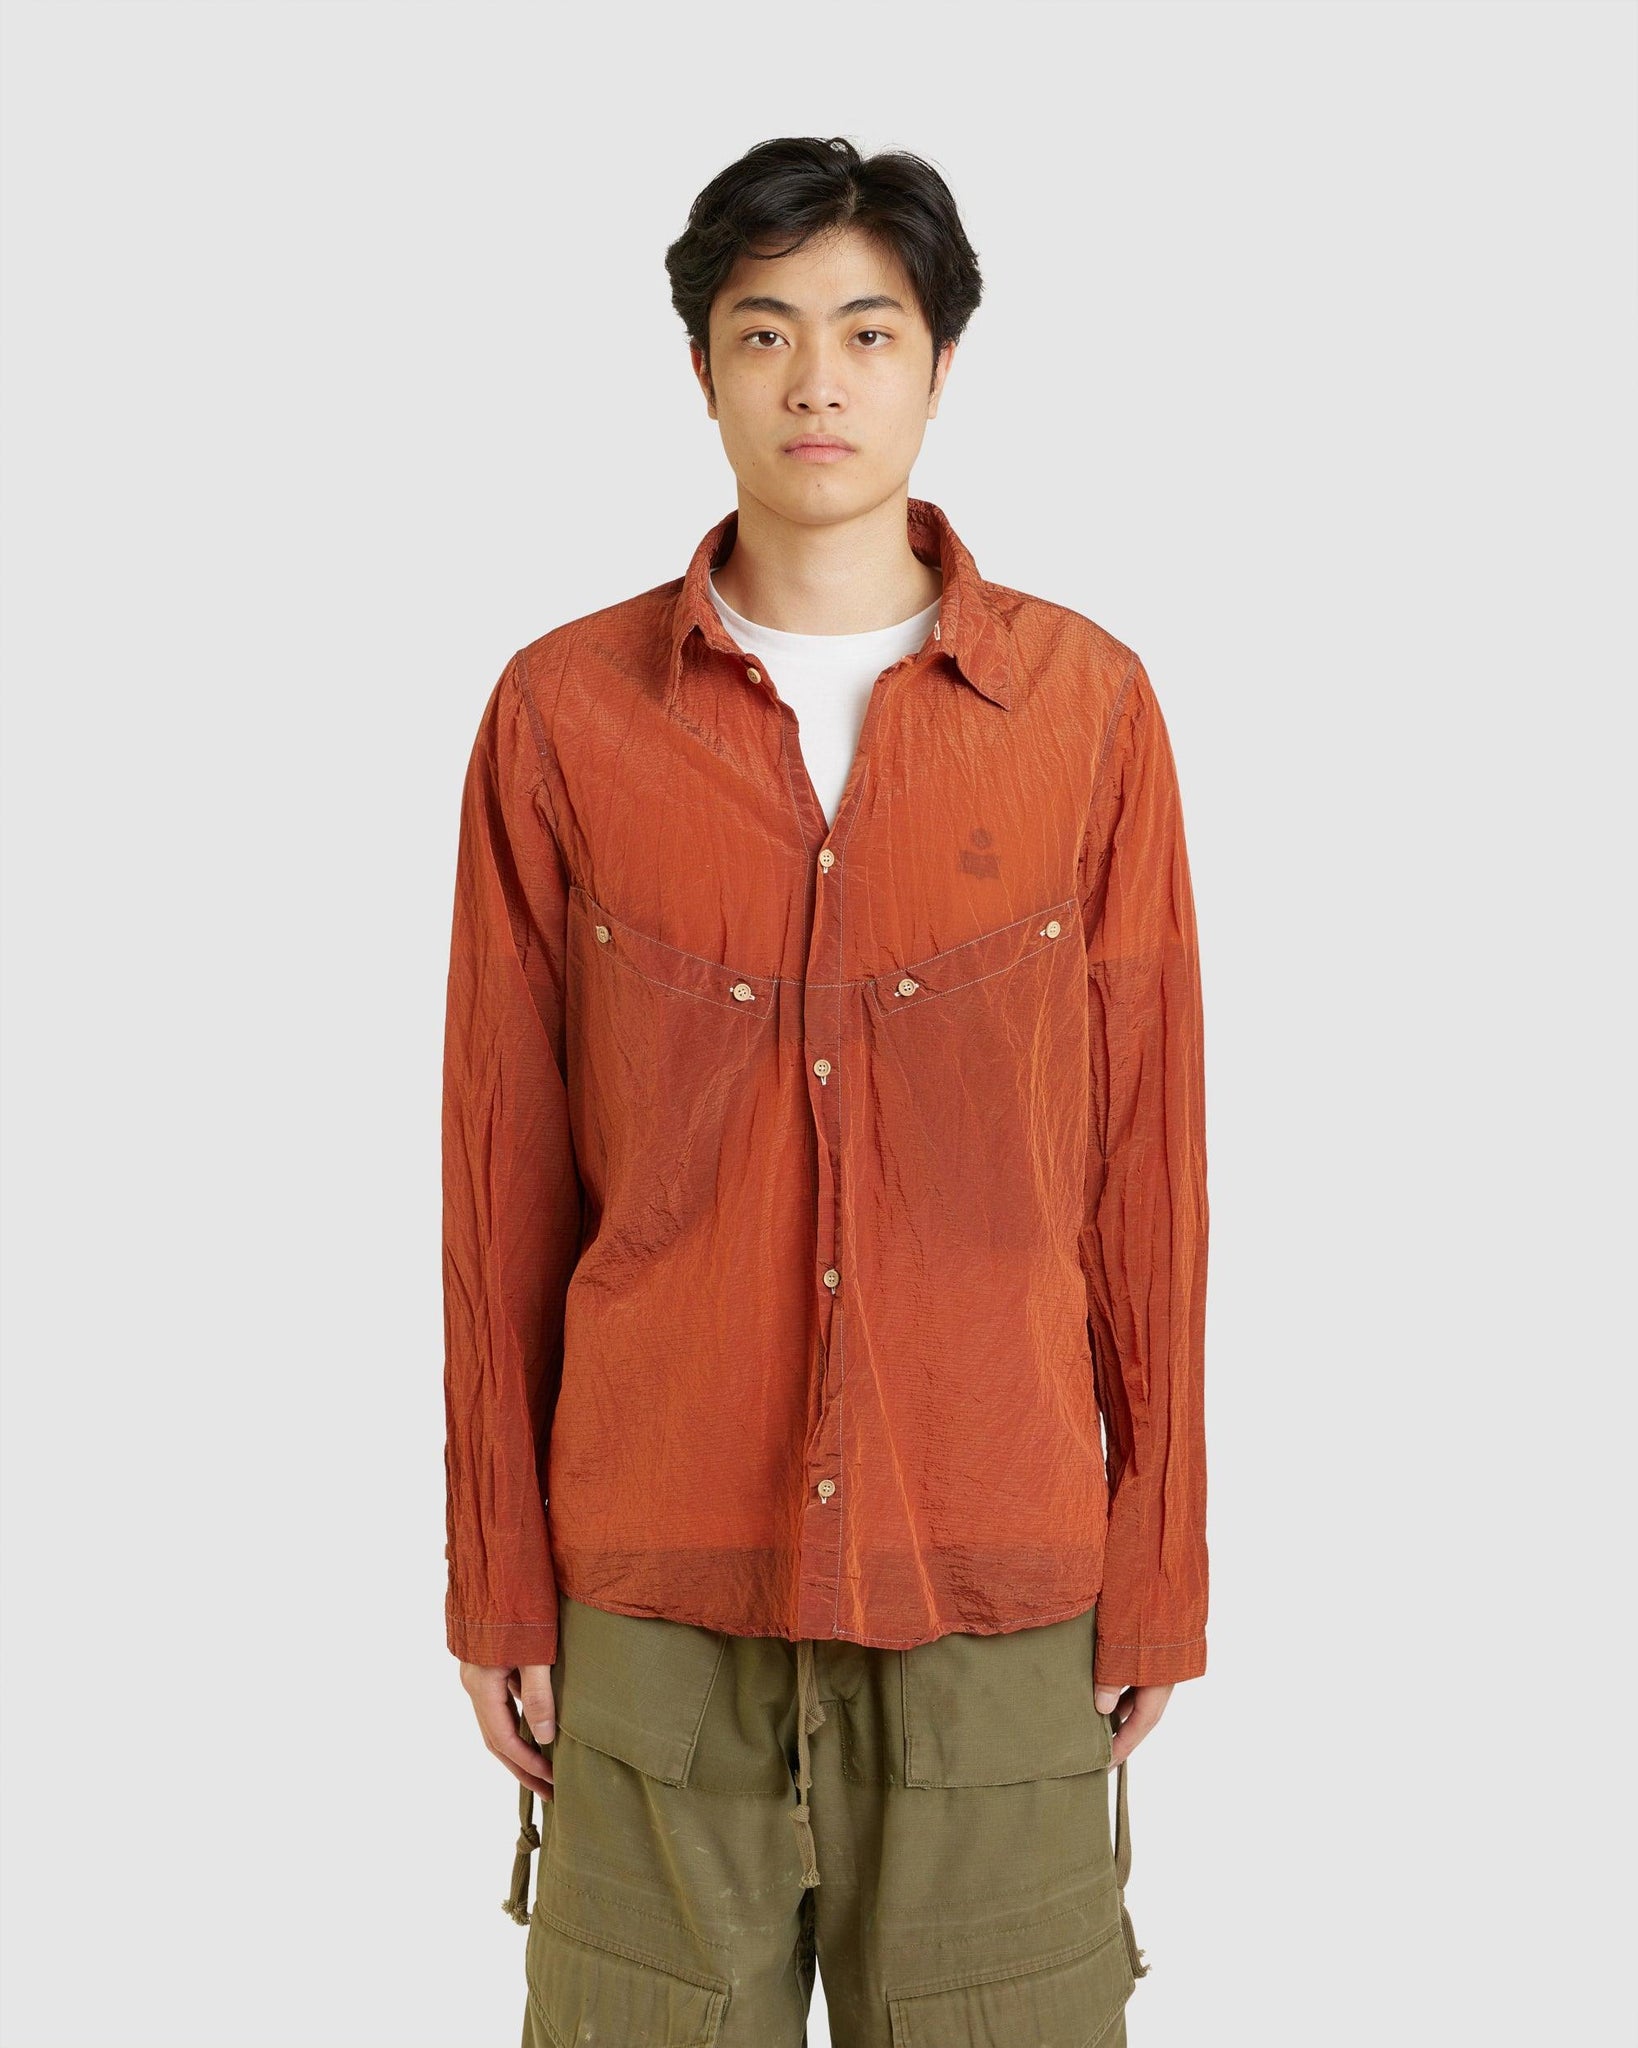 Jor Shirt Orange - {{ collection.title }} - Chinatown Country Club 